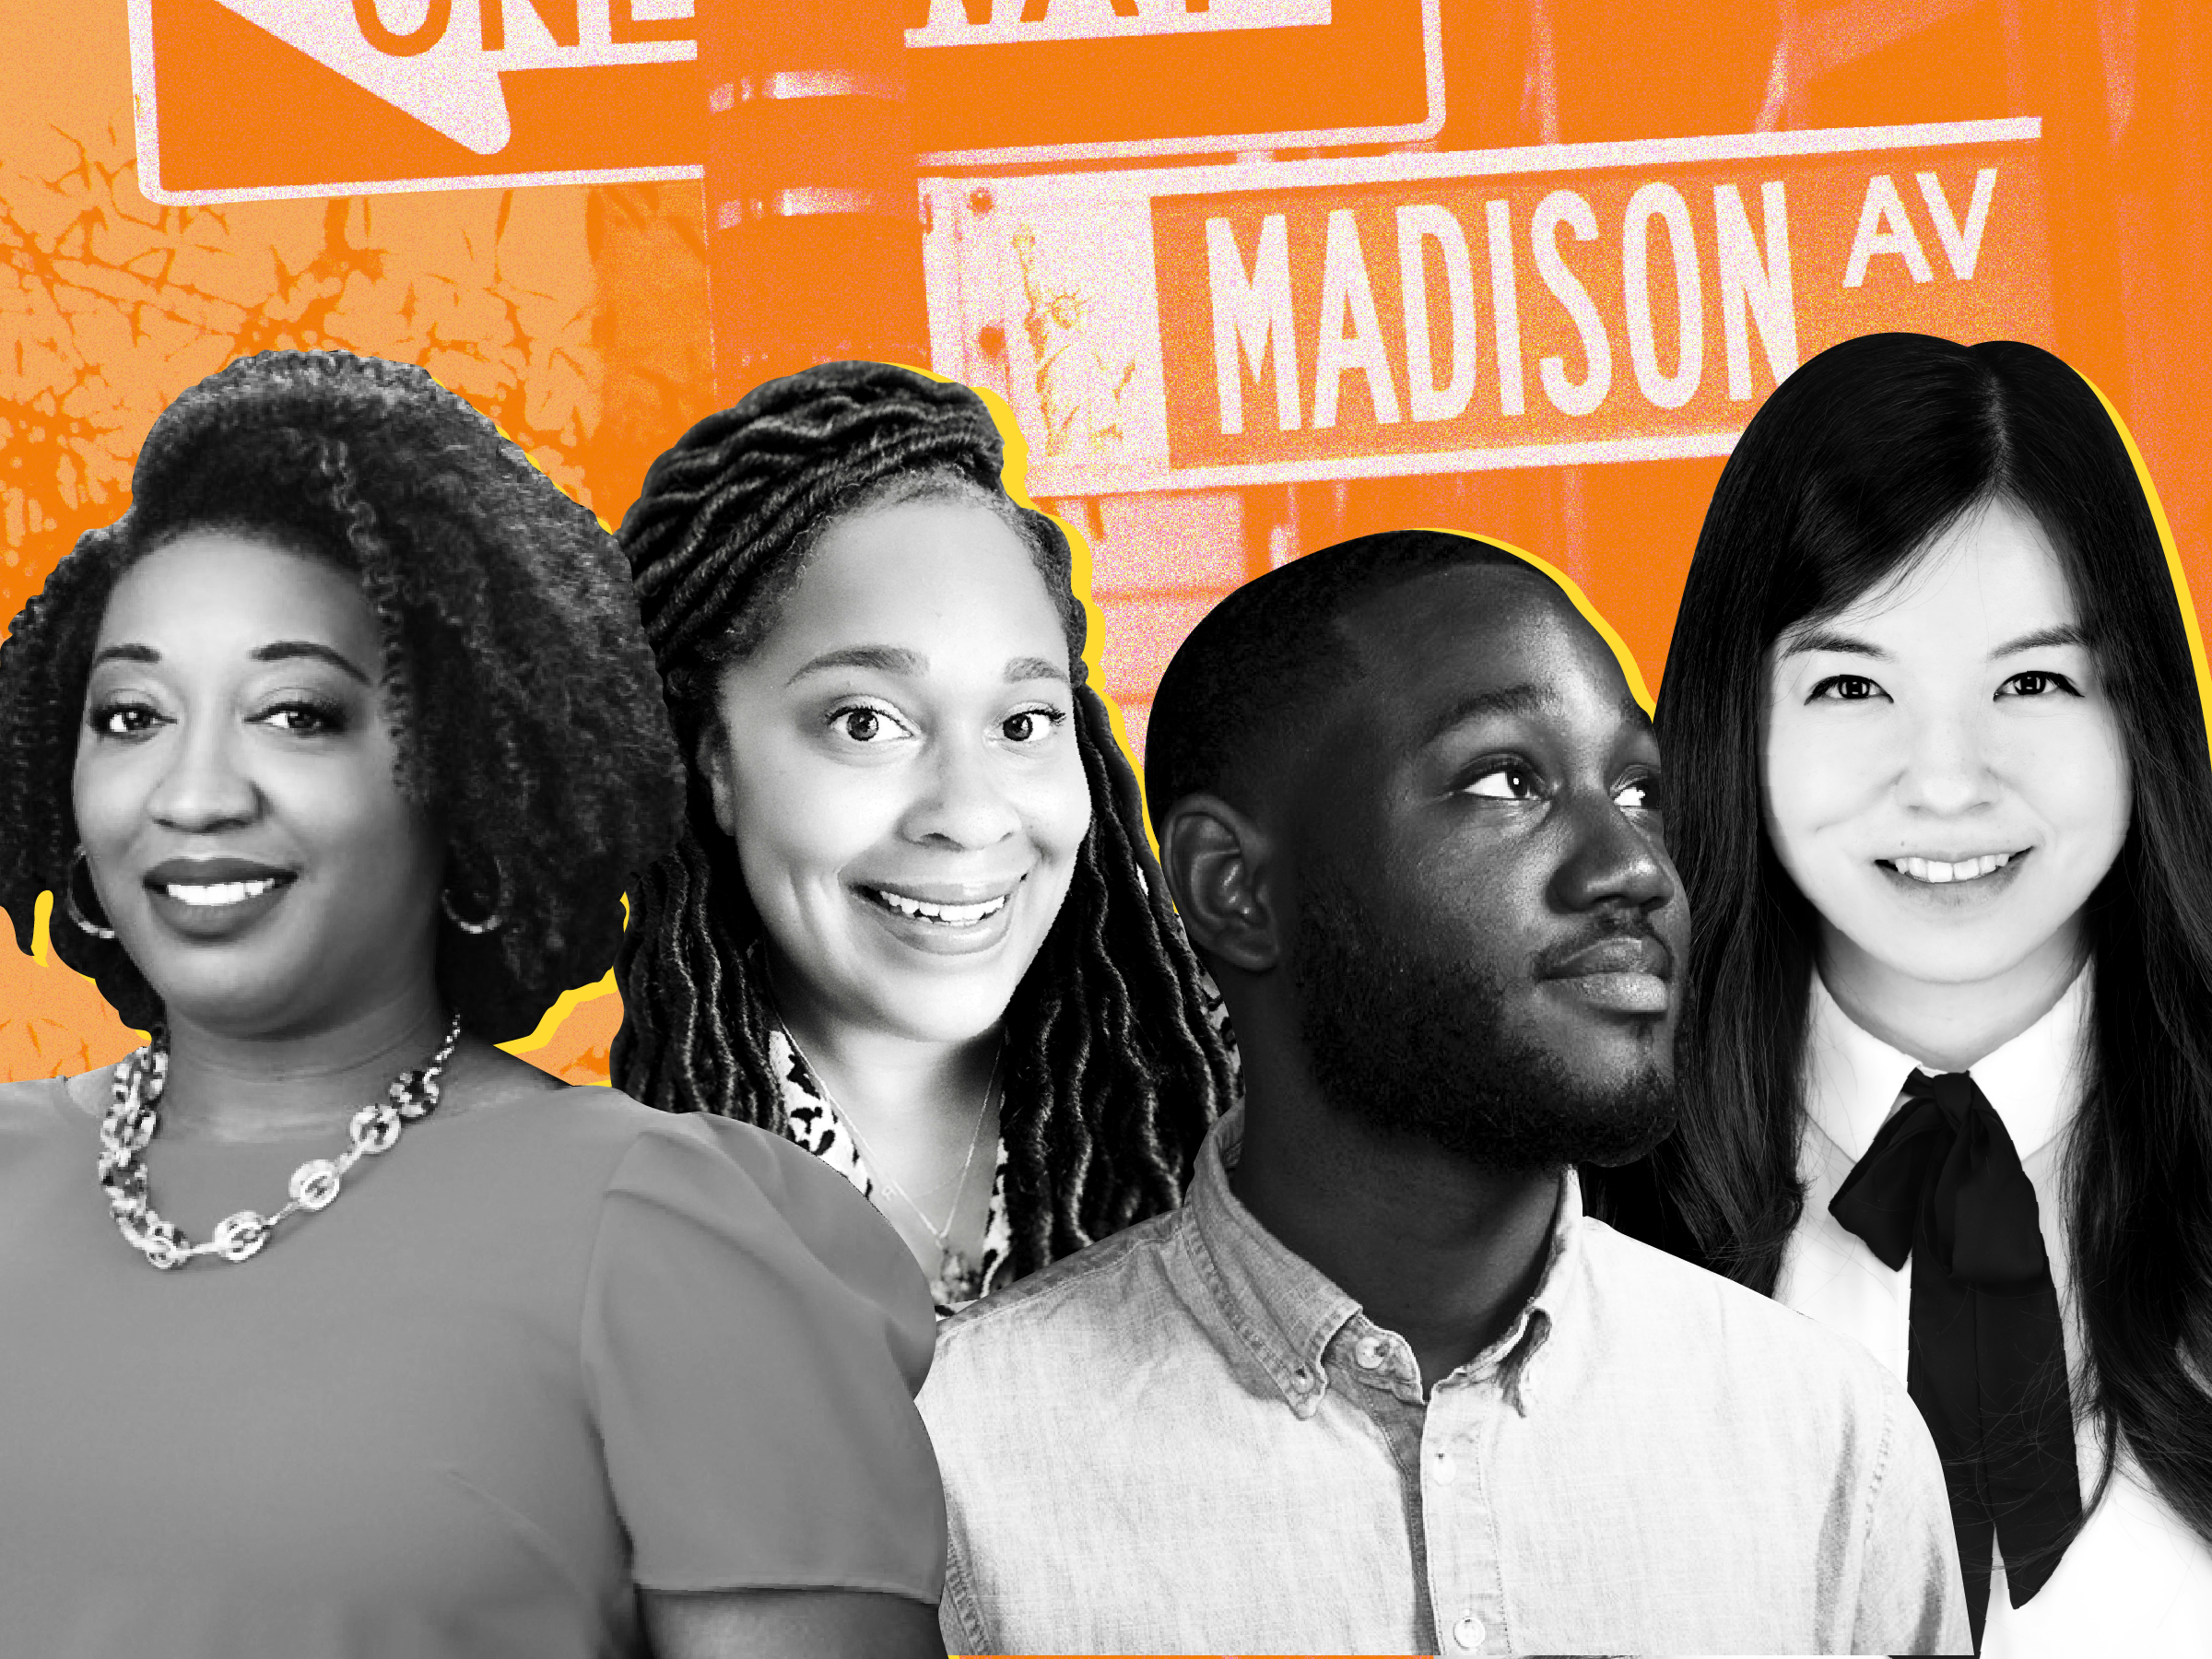 Headshots of Arnetta Whiteside, Arielle Carter, Carlin Dixon, and Nancy Mao against an orange background with a Madison Avenue street sign